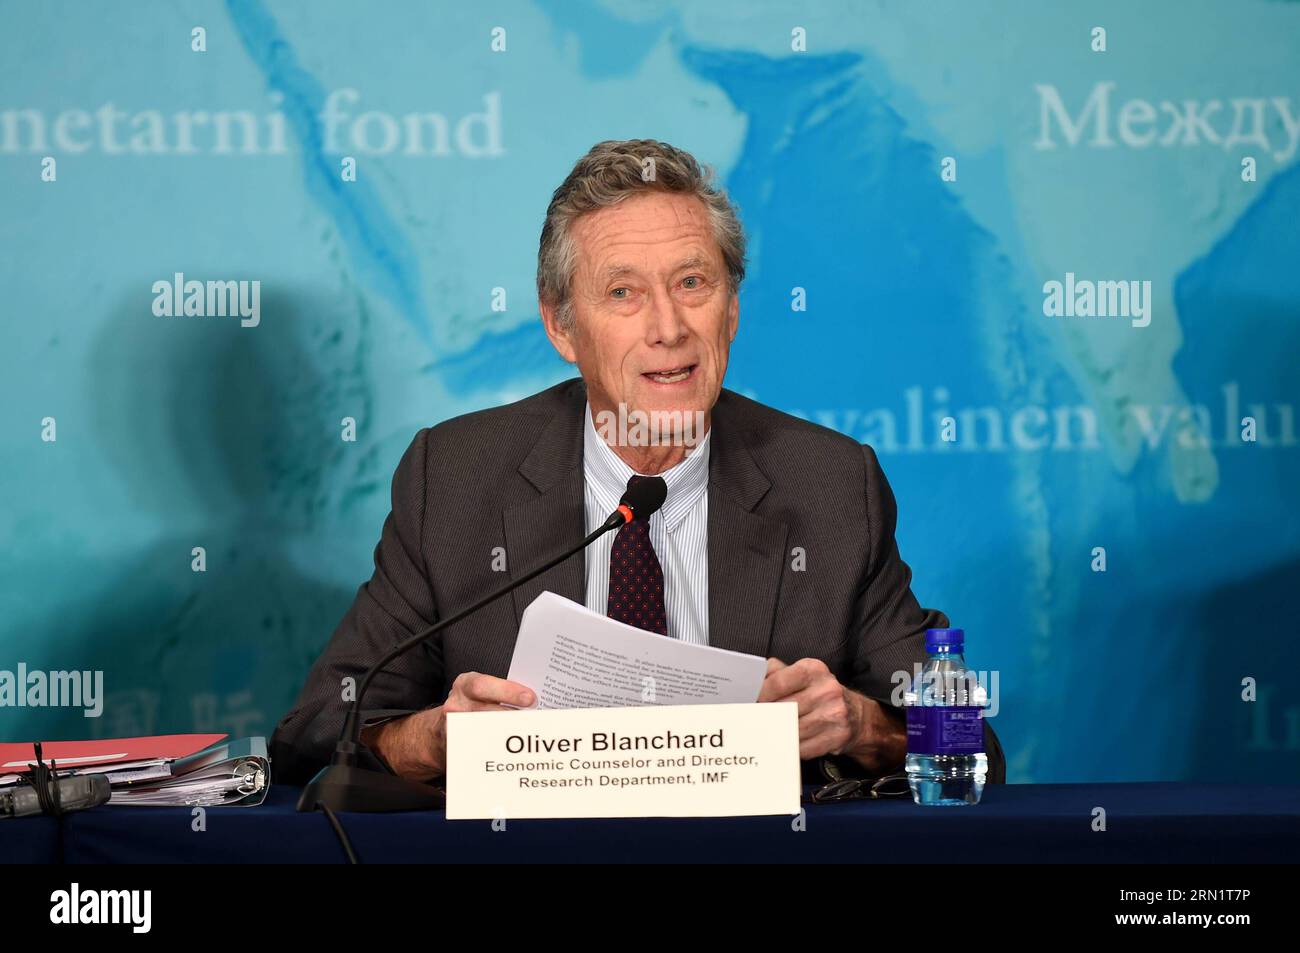 (150120) -- BEIJING, Jan. 20, 2015 -- Olivier Blanchard, IMF economic counsellor and director of the Research Department, attends a press briefing on the World Economic Outlook in Beijing, capital of China, Jan. 20, 2015. ) (wyo) CHINA-BEIJING-IMF-WORLD ECONOMIC OUTLOOK (CN) LixXin PUBLICATIONxNOTxINxCHN   Beijing Jan 20 2015 Olivier Blanchard IMF Economic counselor and Director of The Research Department Attends a Press Briefing ON The World Economic Outlook in Beijing Capital of China Jan 20 2015  China Beijing IMF World Economic Outlook CN  PUBLICATIONxNOTxINxCHN Stock Photo